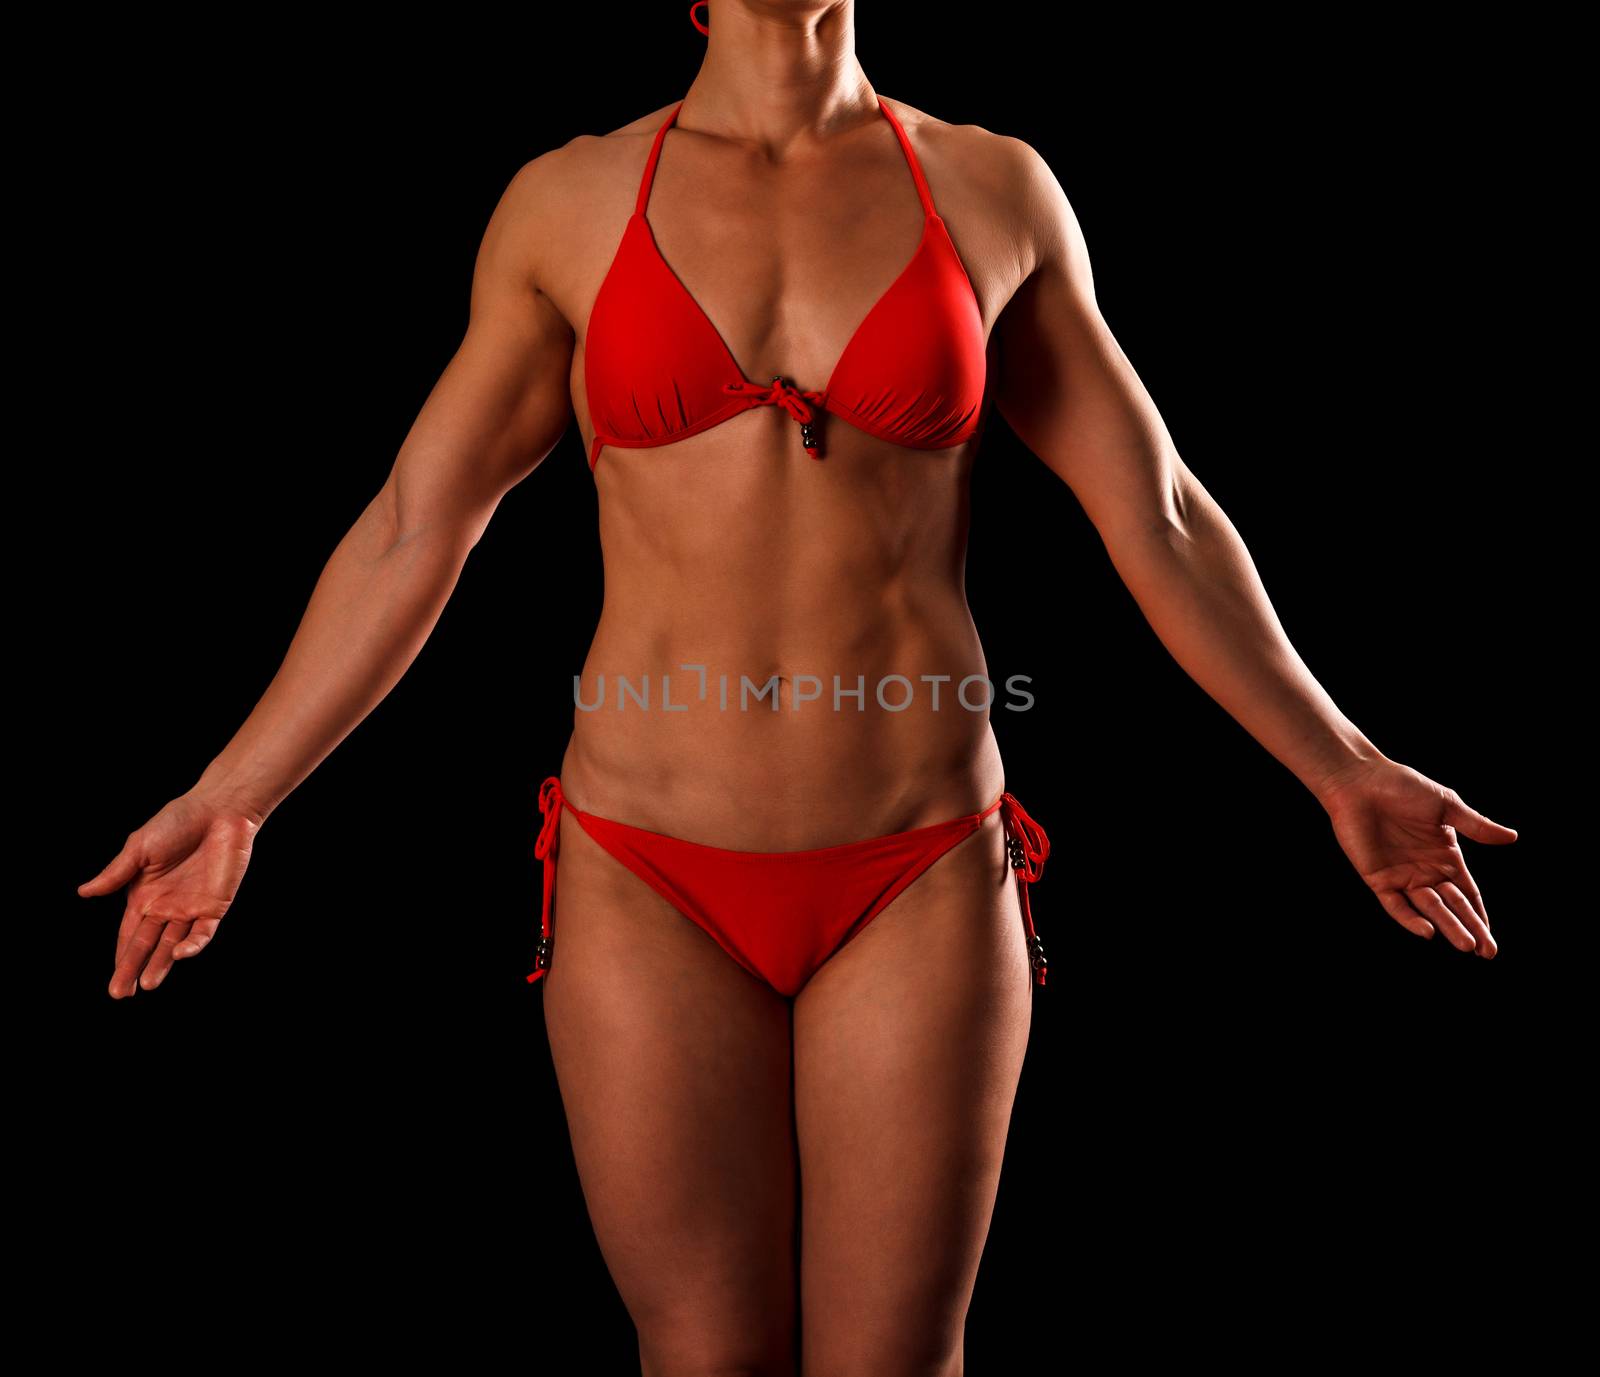 Sexy sports woman in red bikini posing against black background